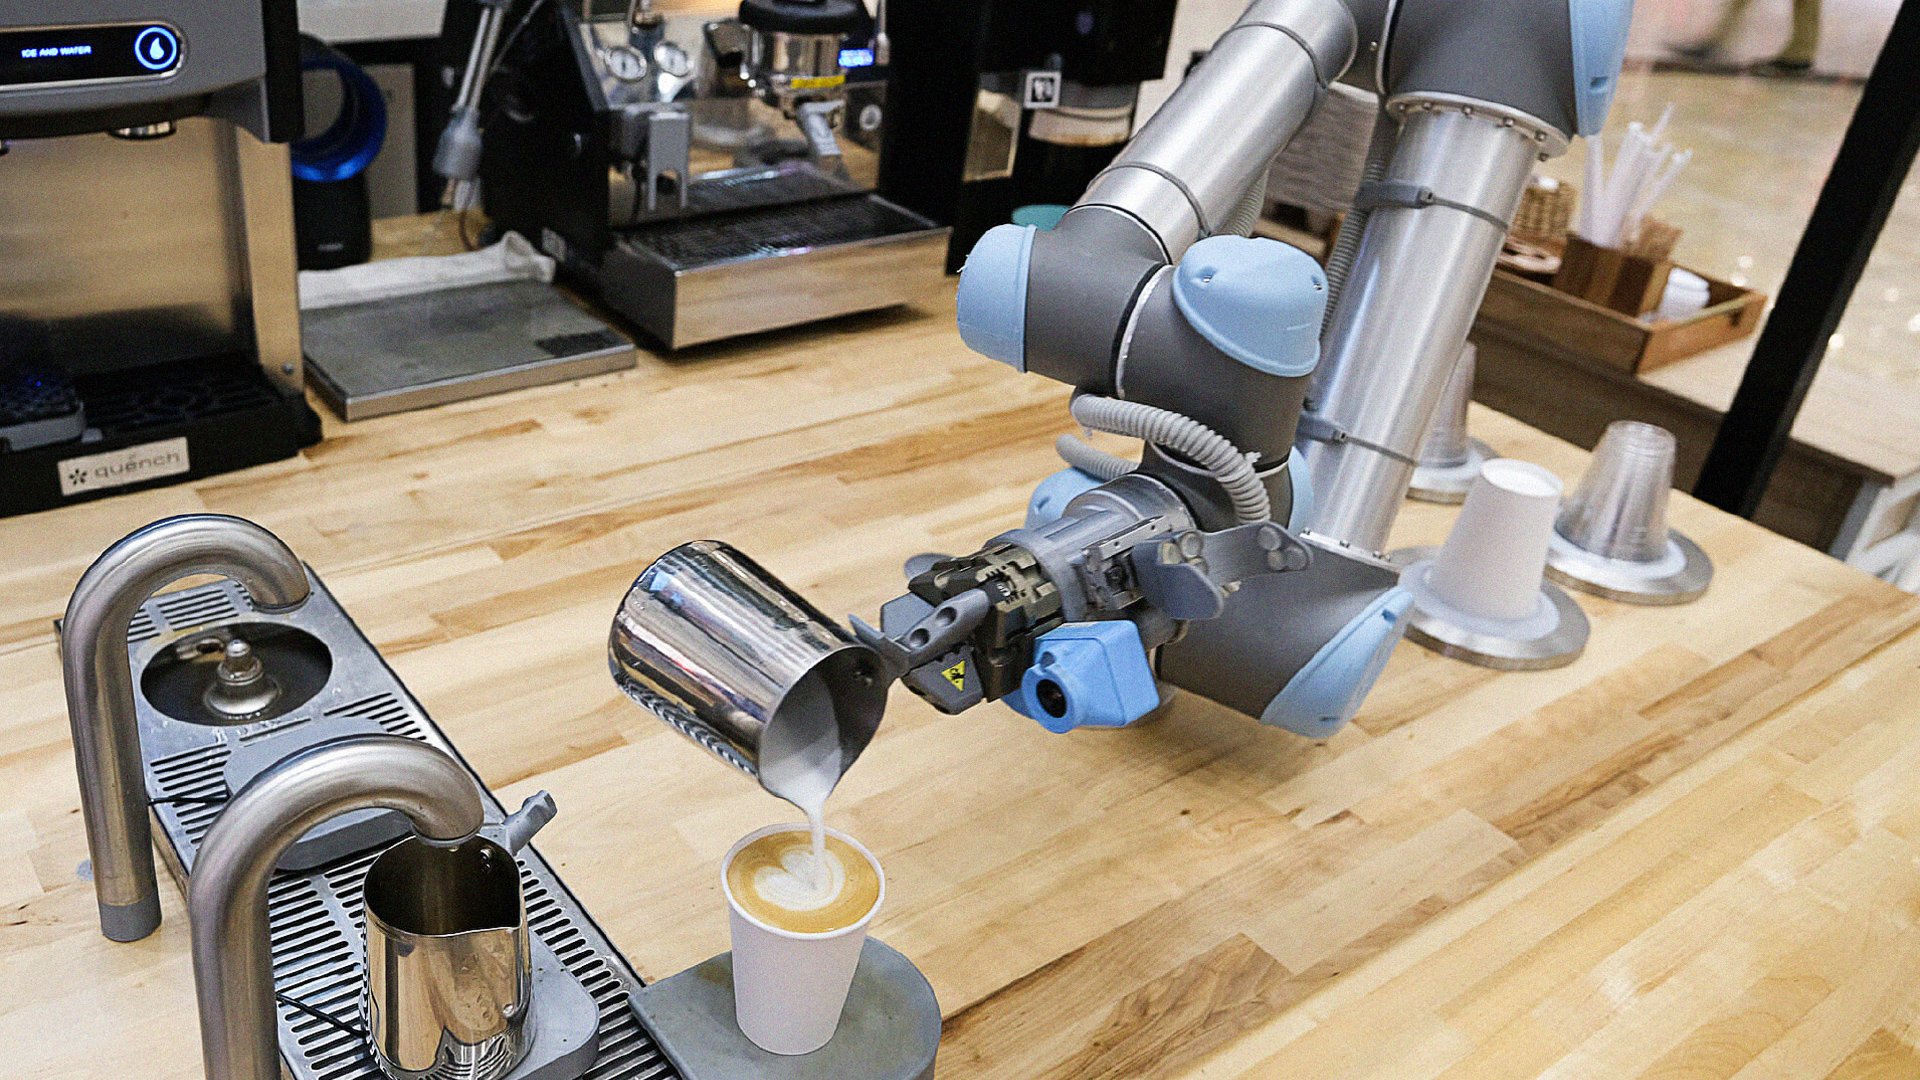 A robot arm pours freshly steamed milk into a cup creating latte art